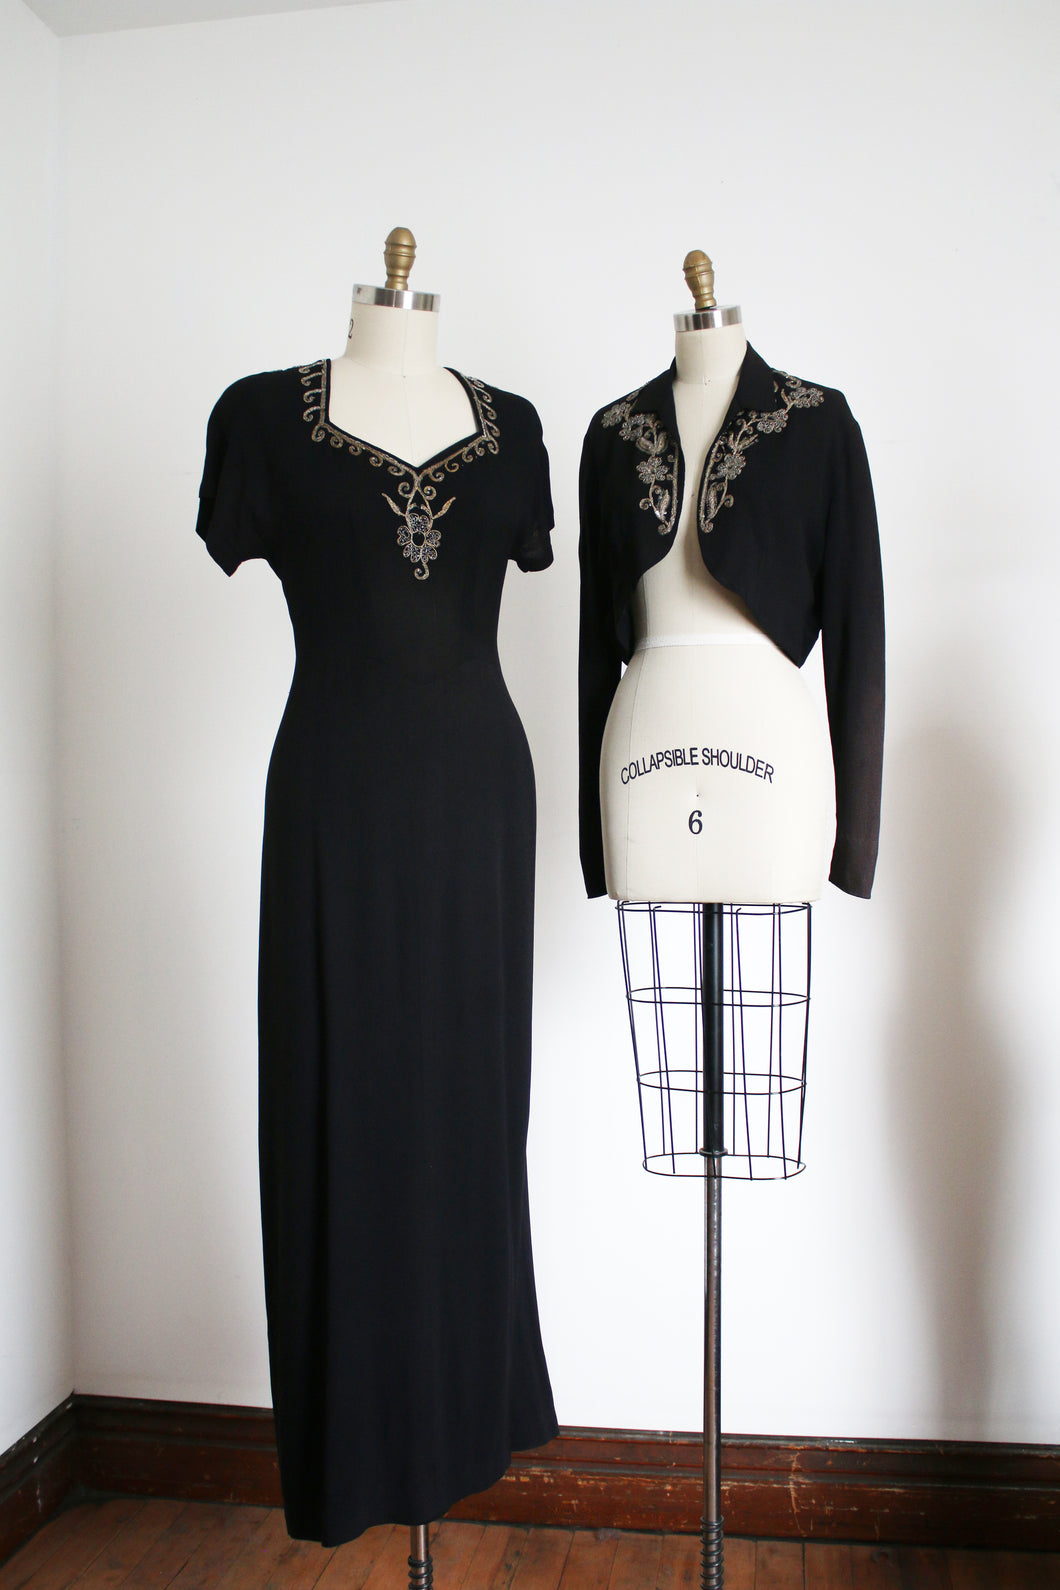 Vintage 1920s Crepe & Lace Gown Black Evening Dress, fits 36 inch bust